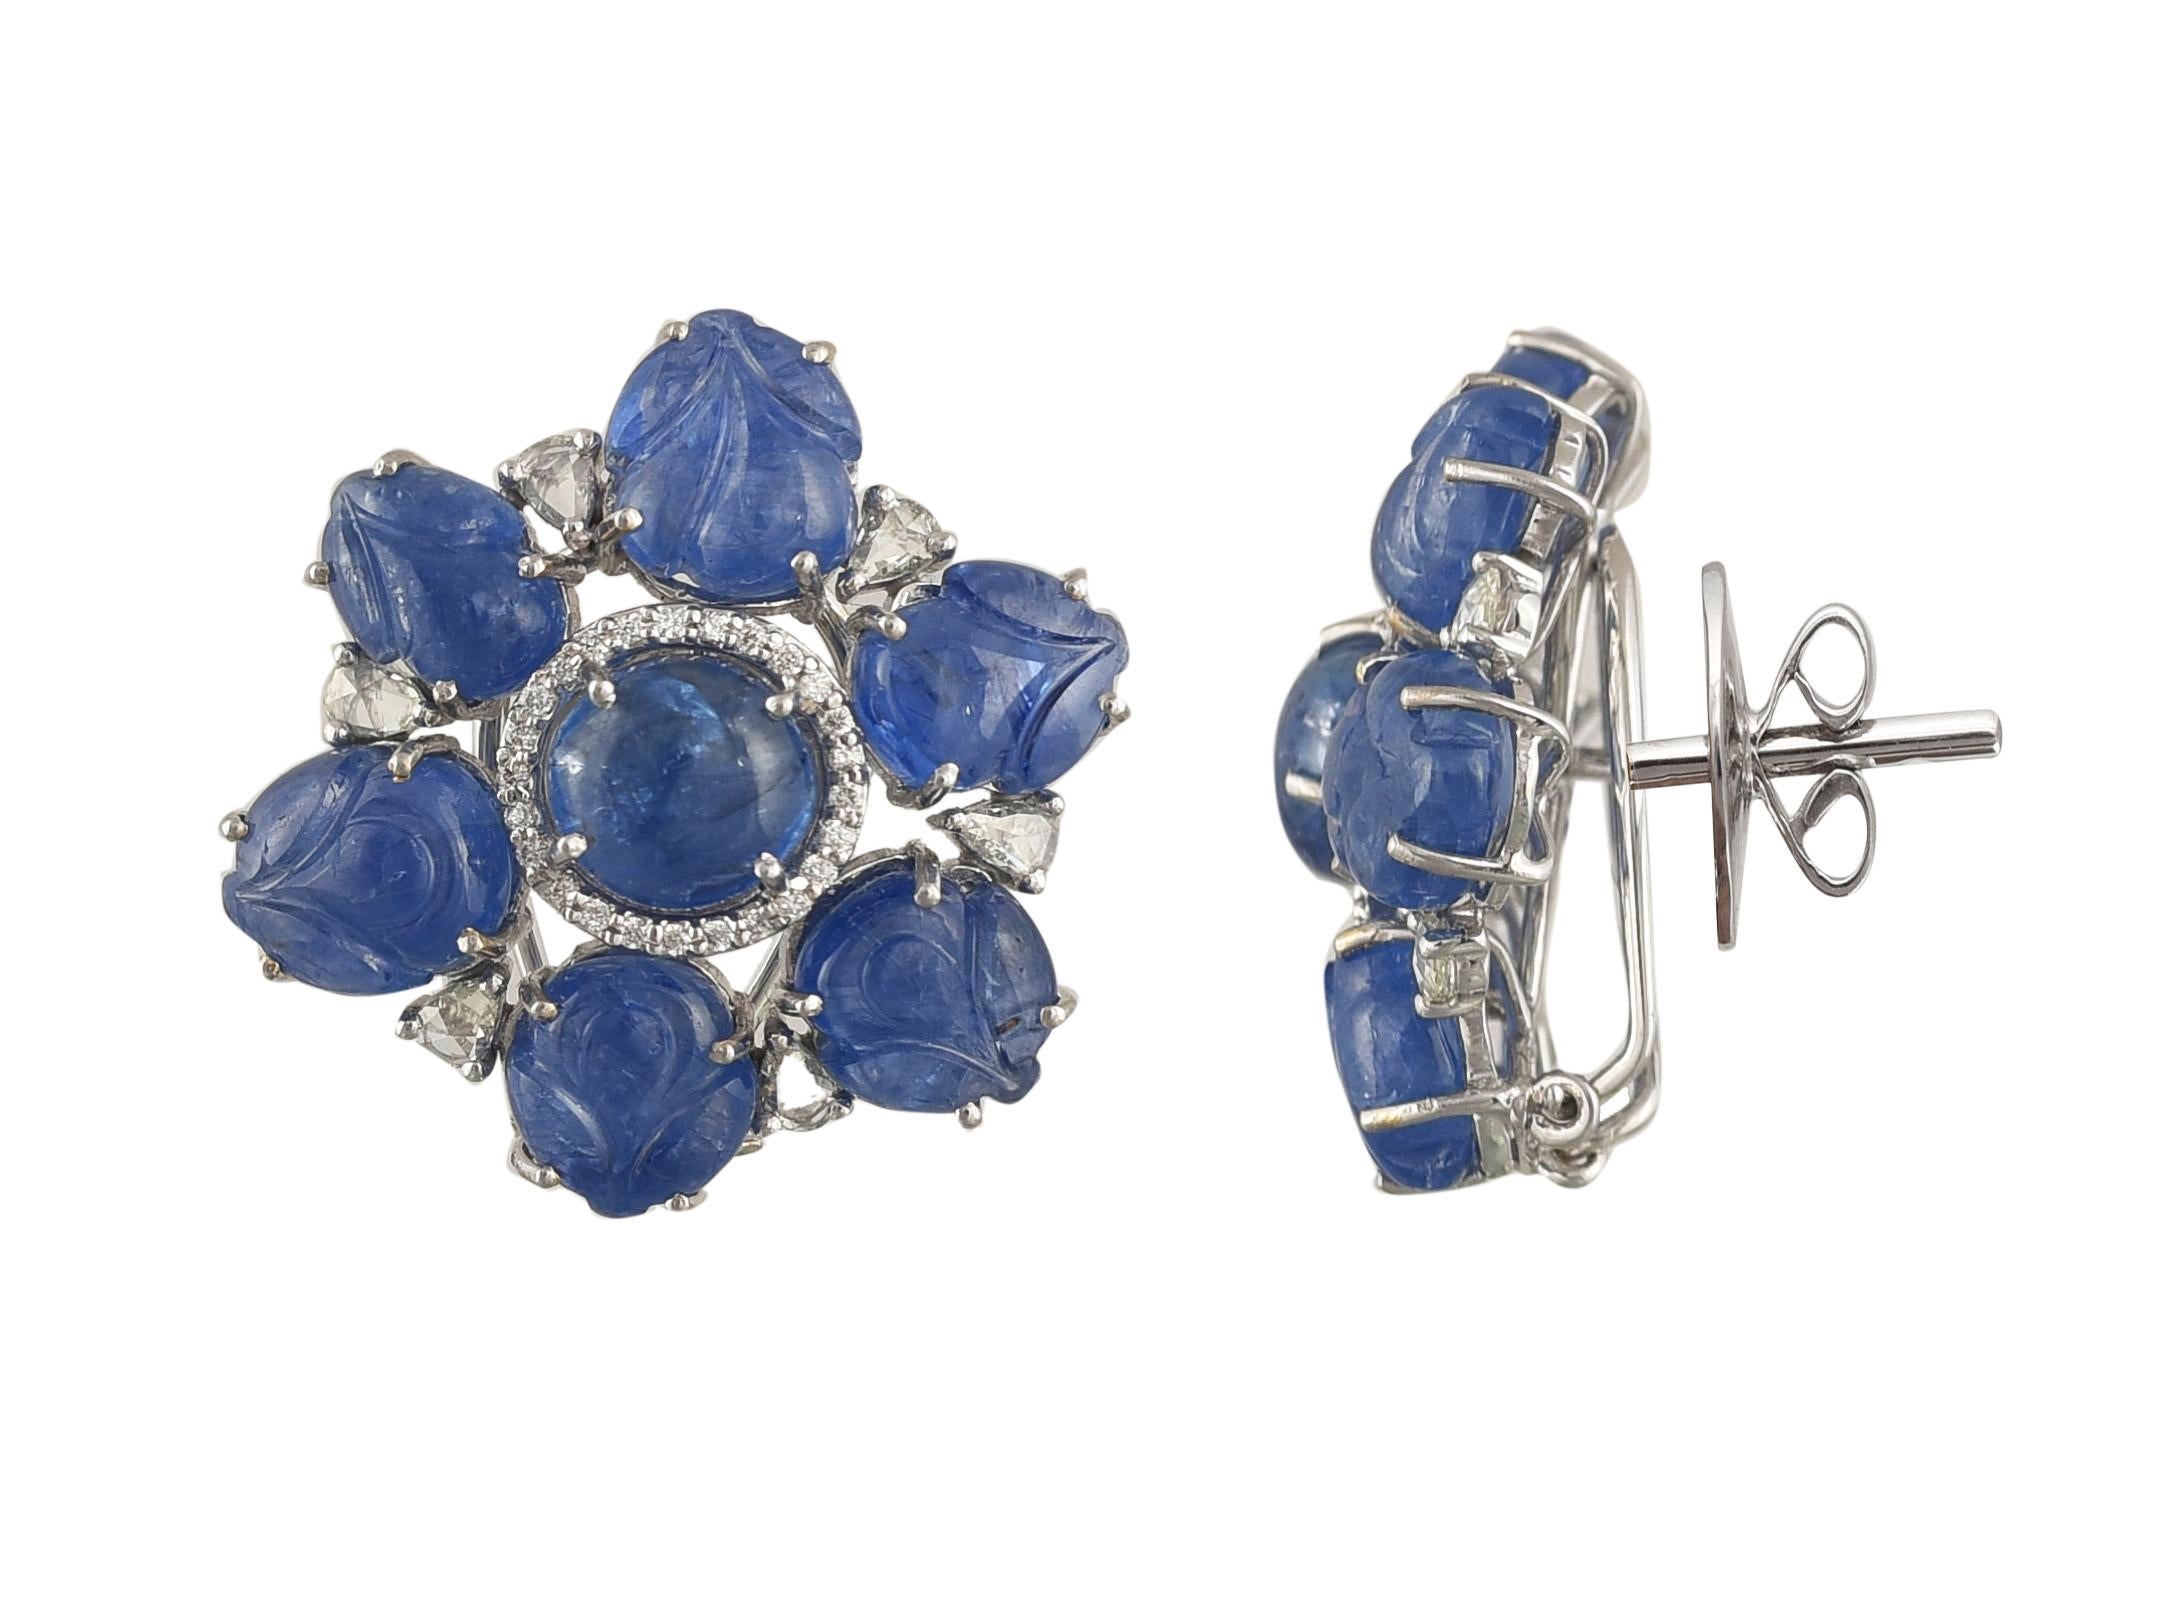 A very chic pair of Burmese Blue Sapphire stud earrings set in 18K white gold and diamonds. The Burmese sapphire is natural, no heat and weighs 37.12 carats. The Sapphires originate from Burma, and is in a combination of carving and cabochon. The